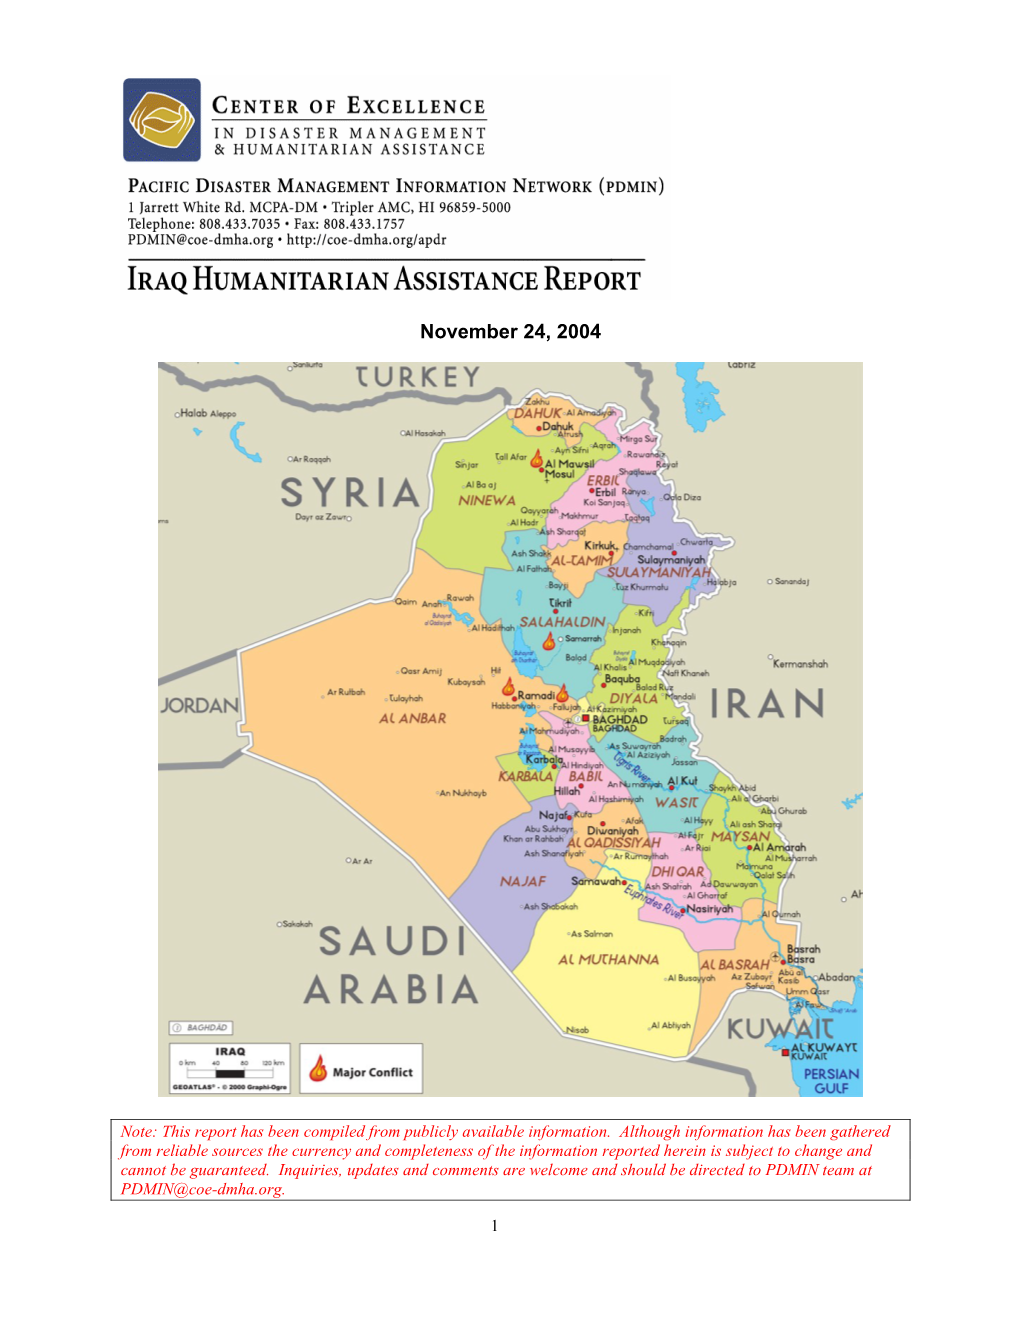 Iraqis; Food Distribution OK; Infrastructure Improving Very Slowly; Reconstruction and Humanitarian Operations Slow—Security, Supply, and Bureaucratic Impediments;